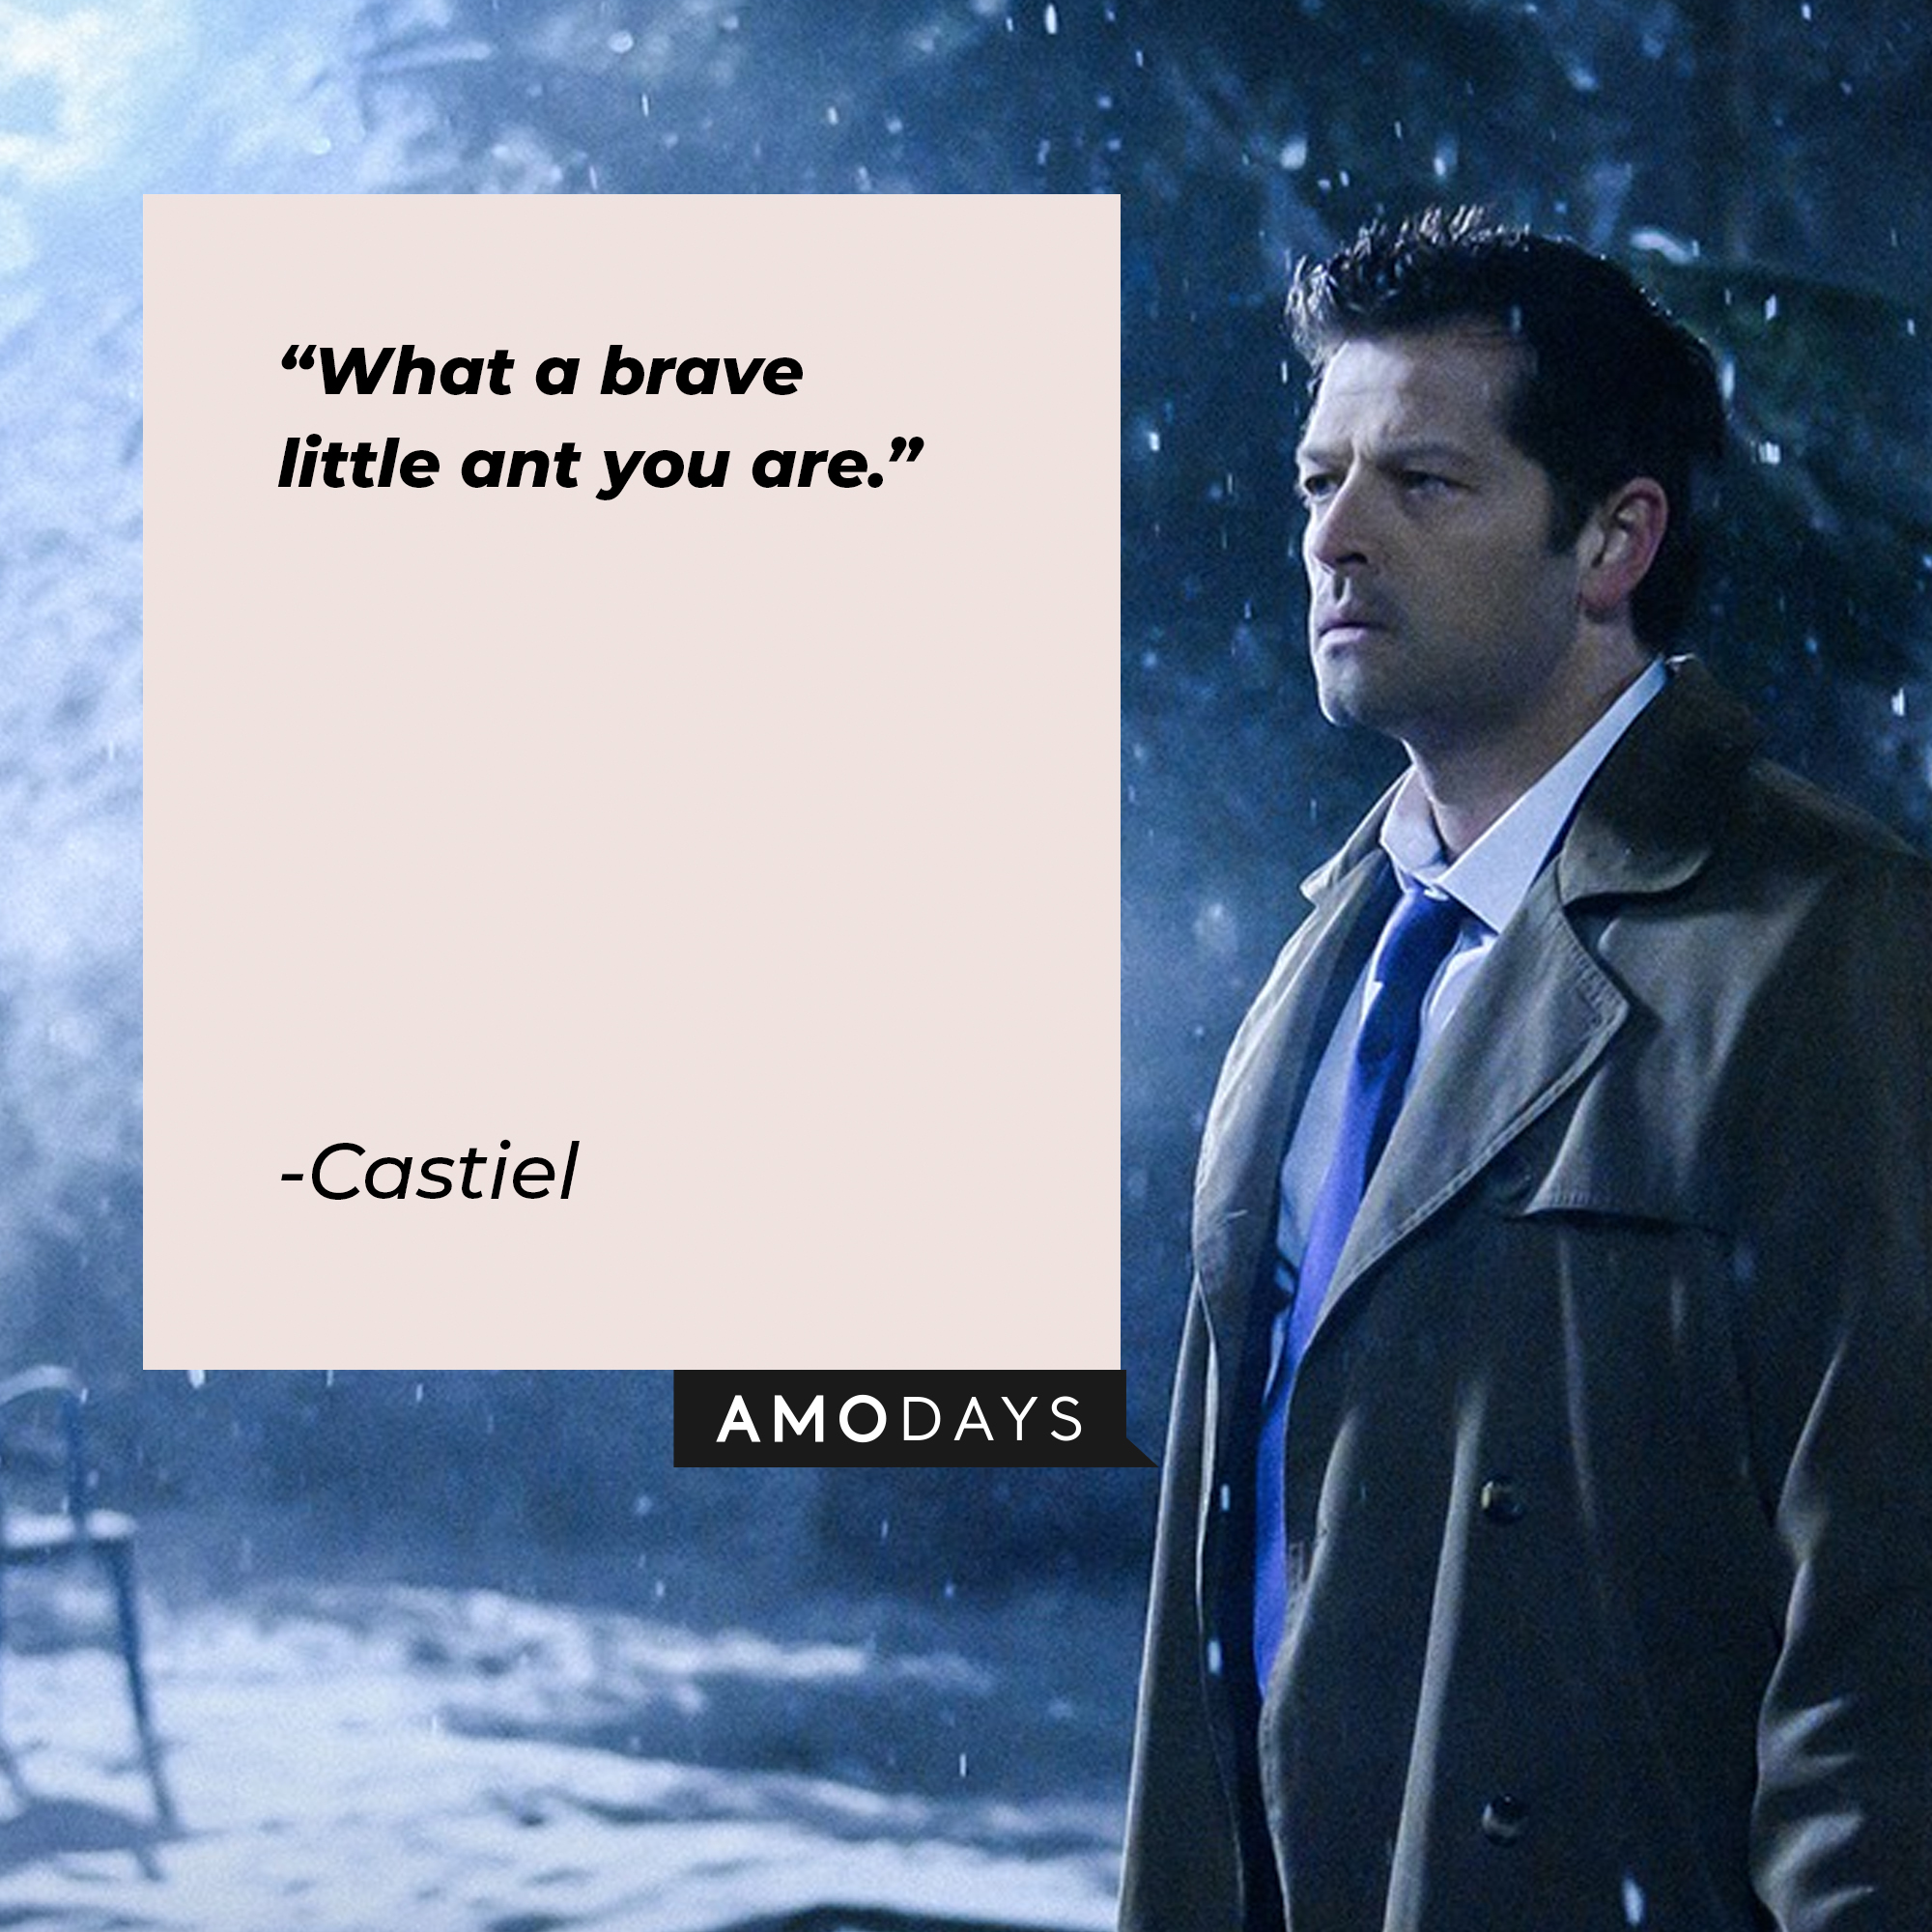 An image of Castiel with his quote: “What a brave little ant you are." |Source: facebook.com/Supernatural